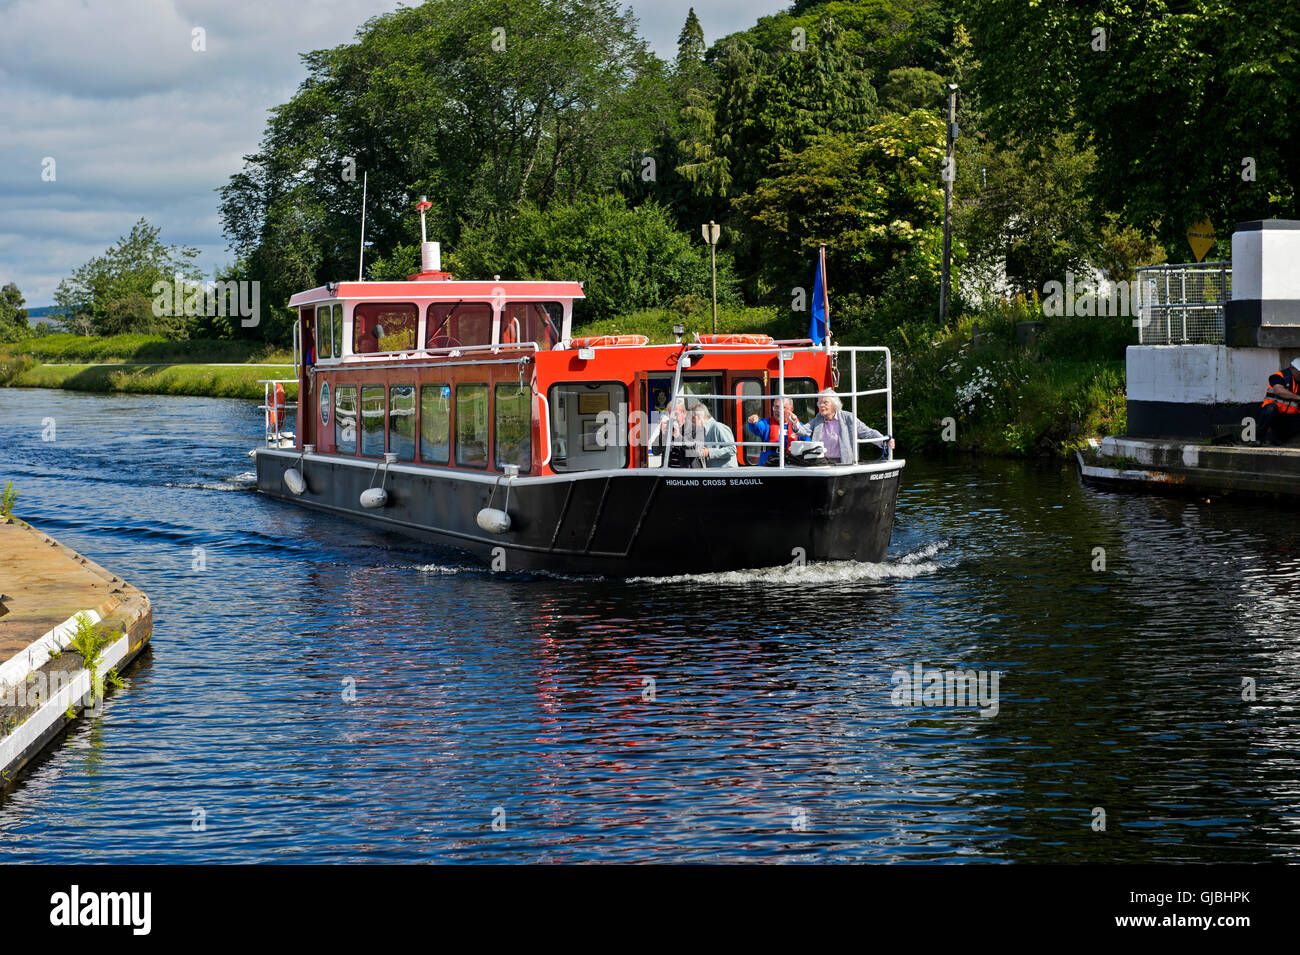 Excursion boat on the Caledonian Canal near Inverness, Scotland, Great Britain Stock Photo